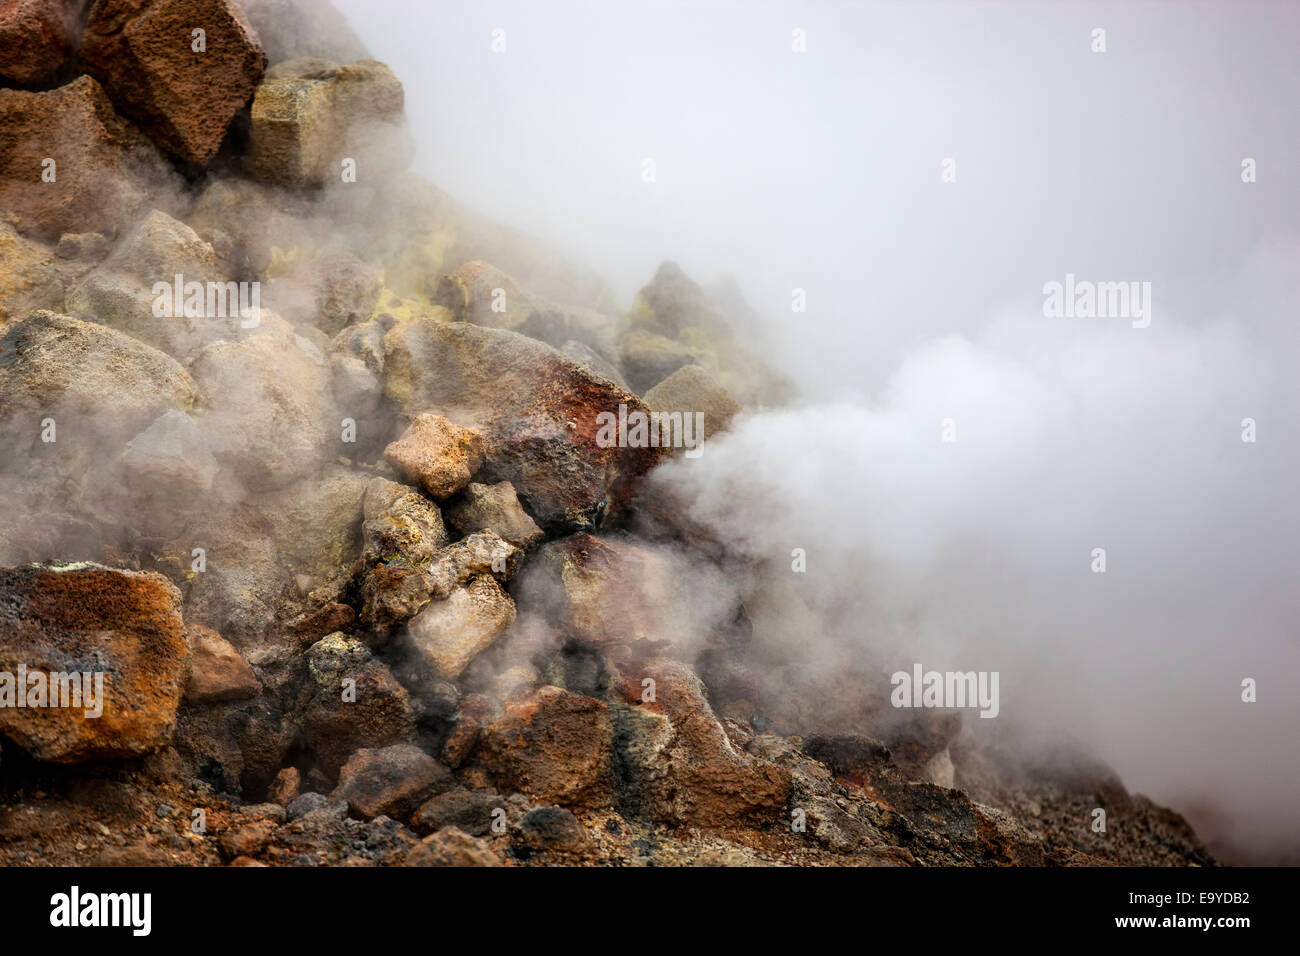 Fumarole evacuating pressurized gas from volcanic activity in the geothermal area of Hverir Iceland near Lake Myvatn. Stock Photo